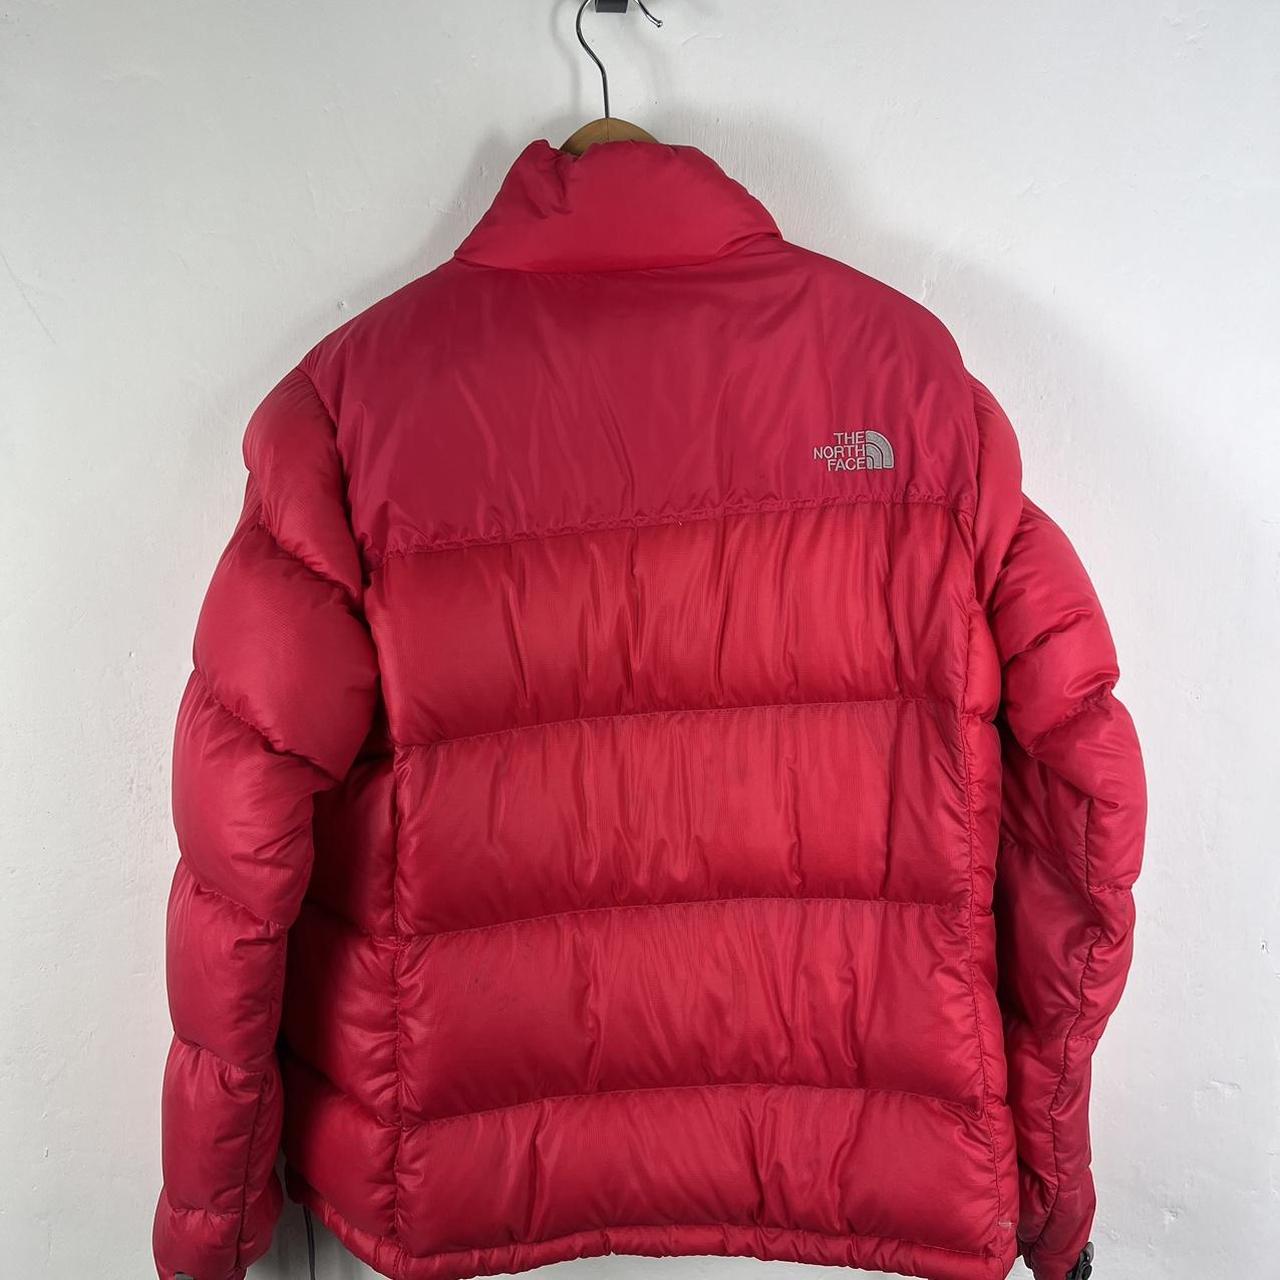 North face puffer jacket small